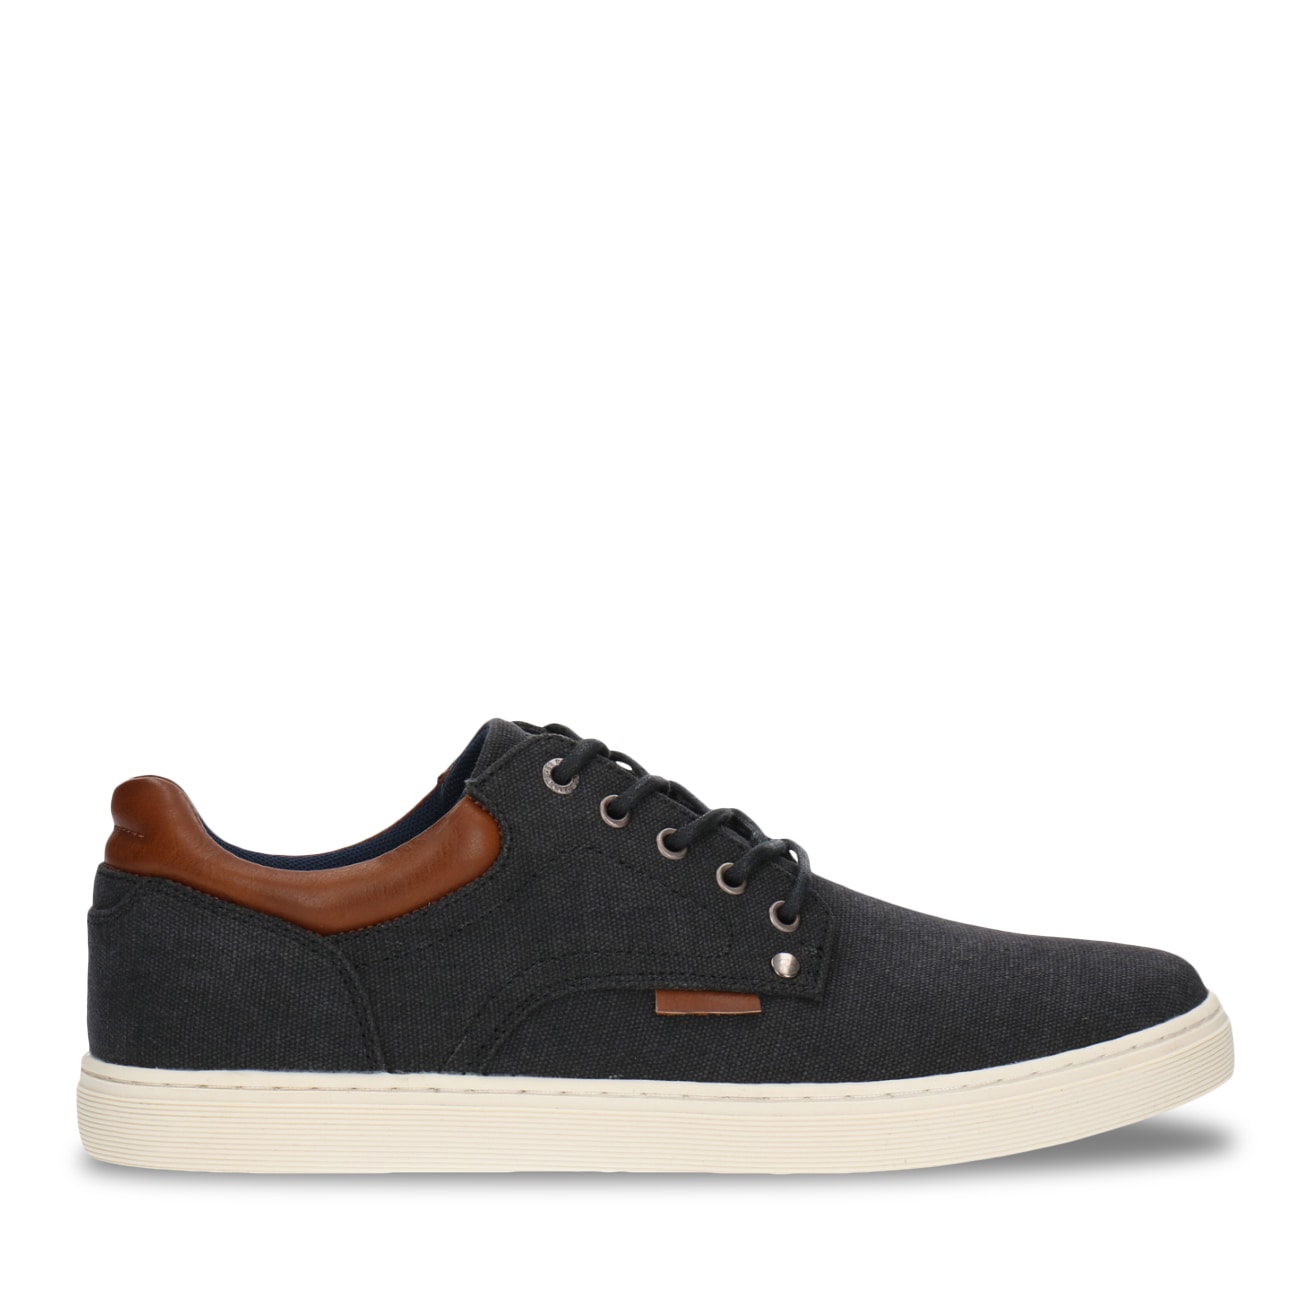 B52 By Bullboxer Men's Lo Casual Sneaker | The Shoe Company